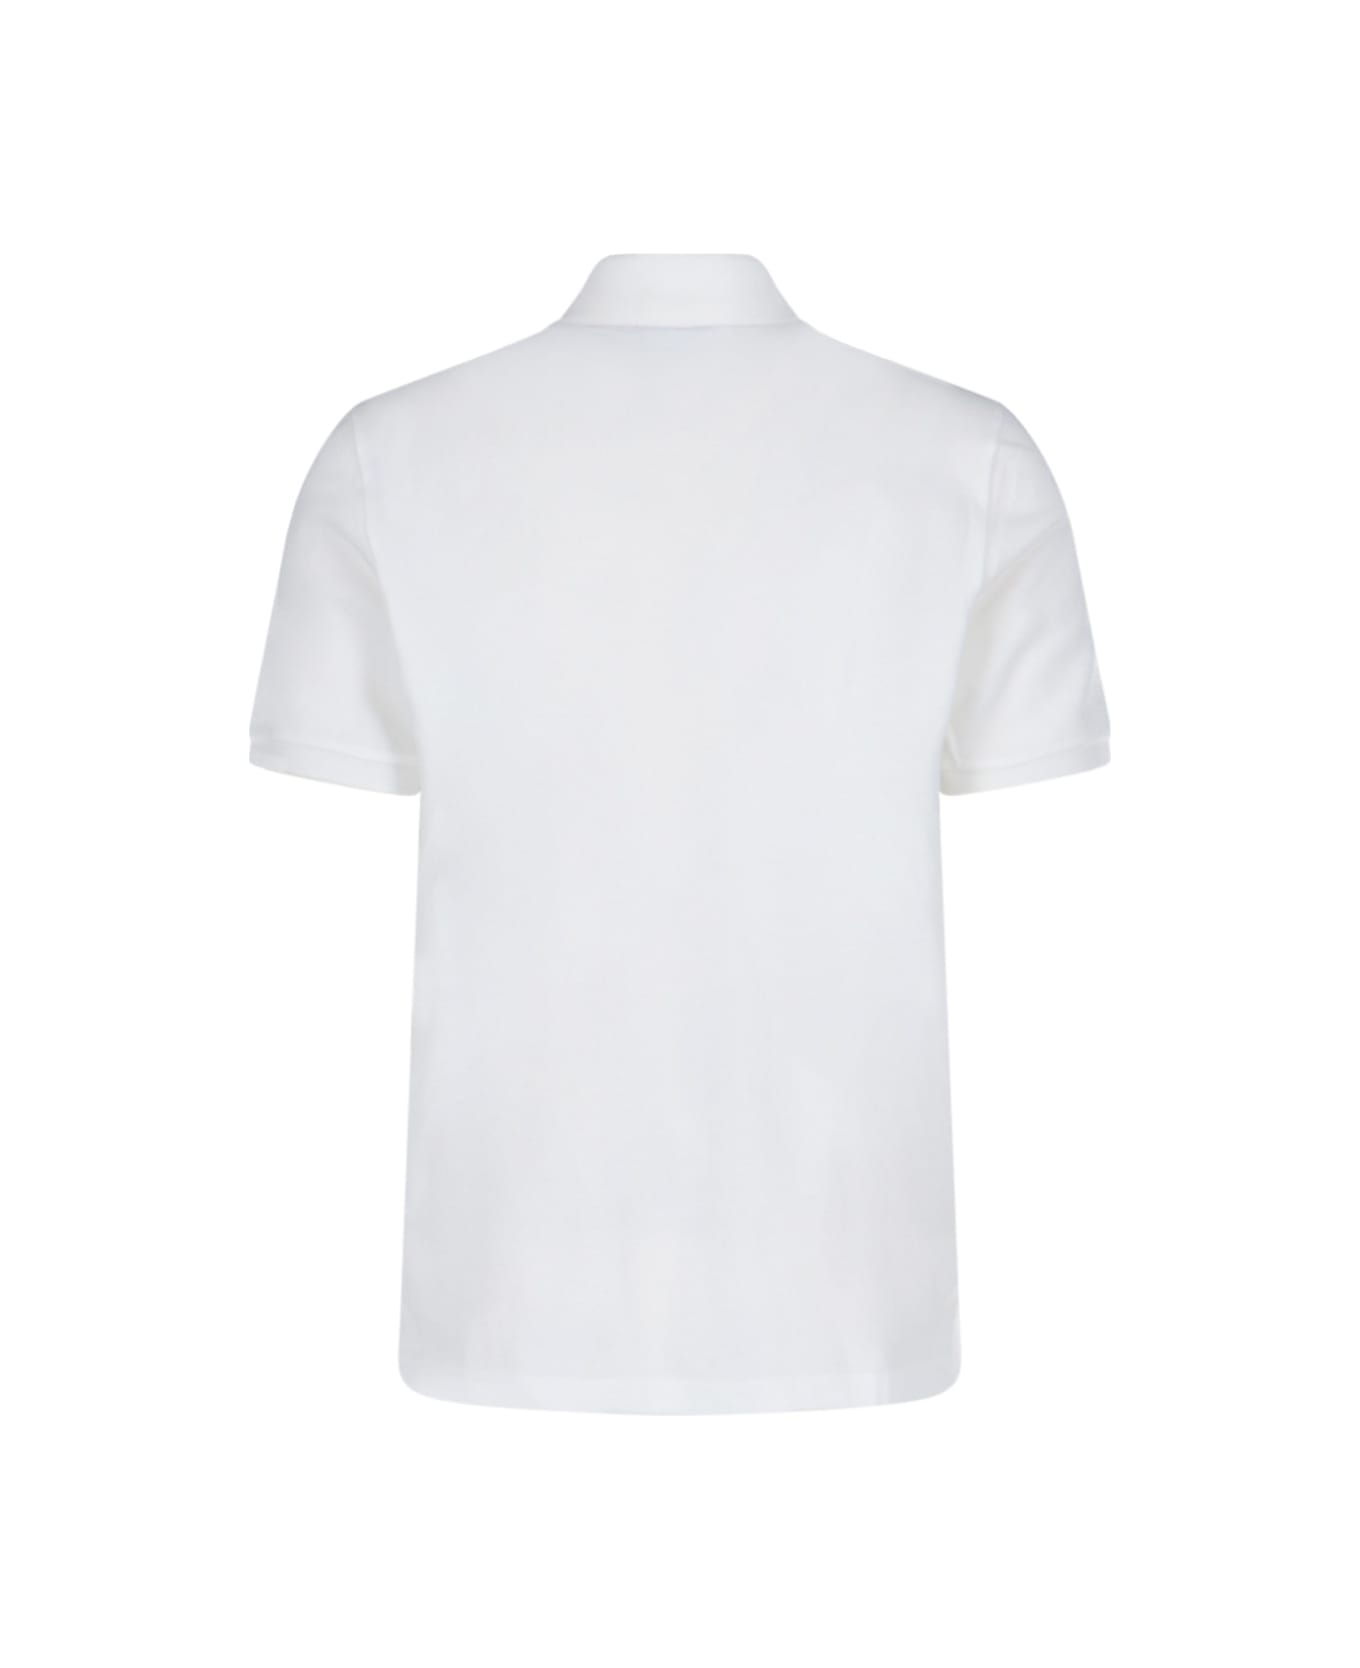 Polo Ralph Lauren Embroidered Polo Shirt - White ポロシャツ